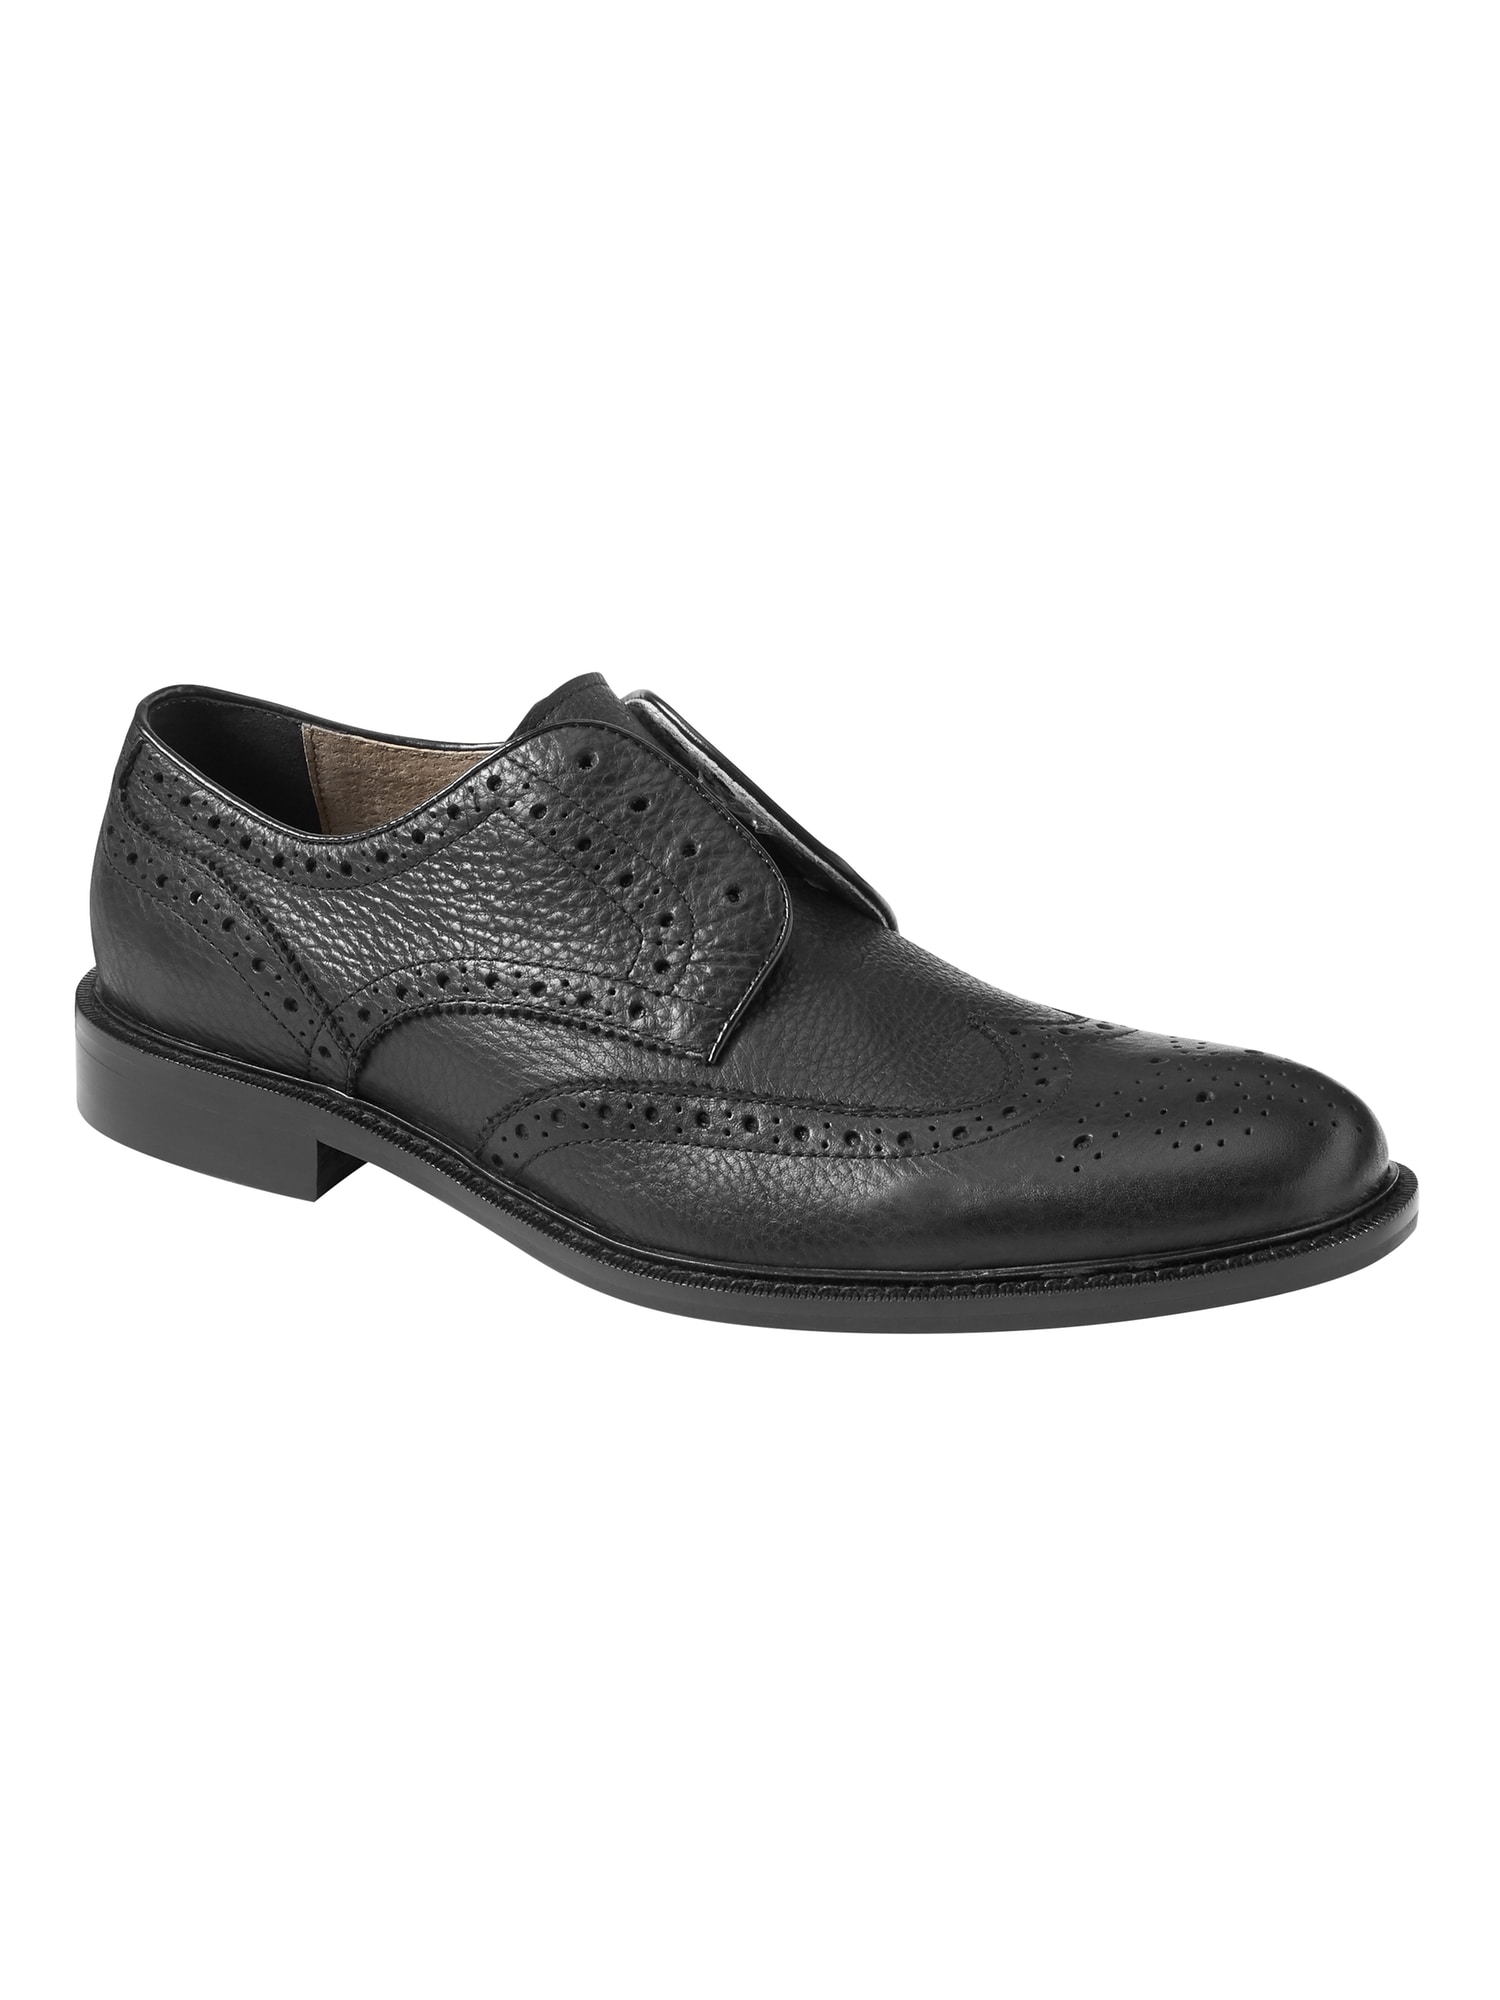 Lawsin Laceless Leather Brogue Oxford